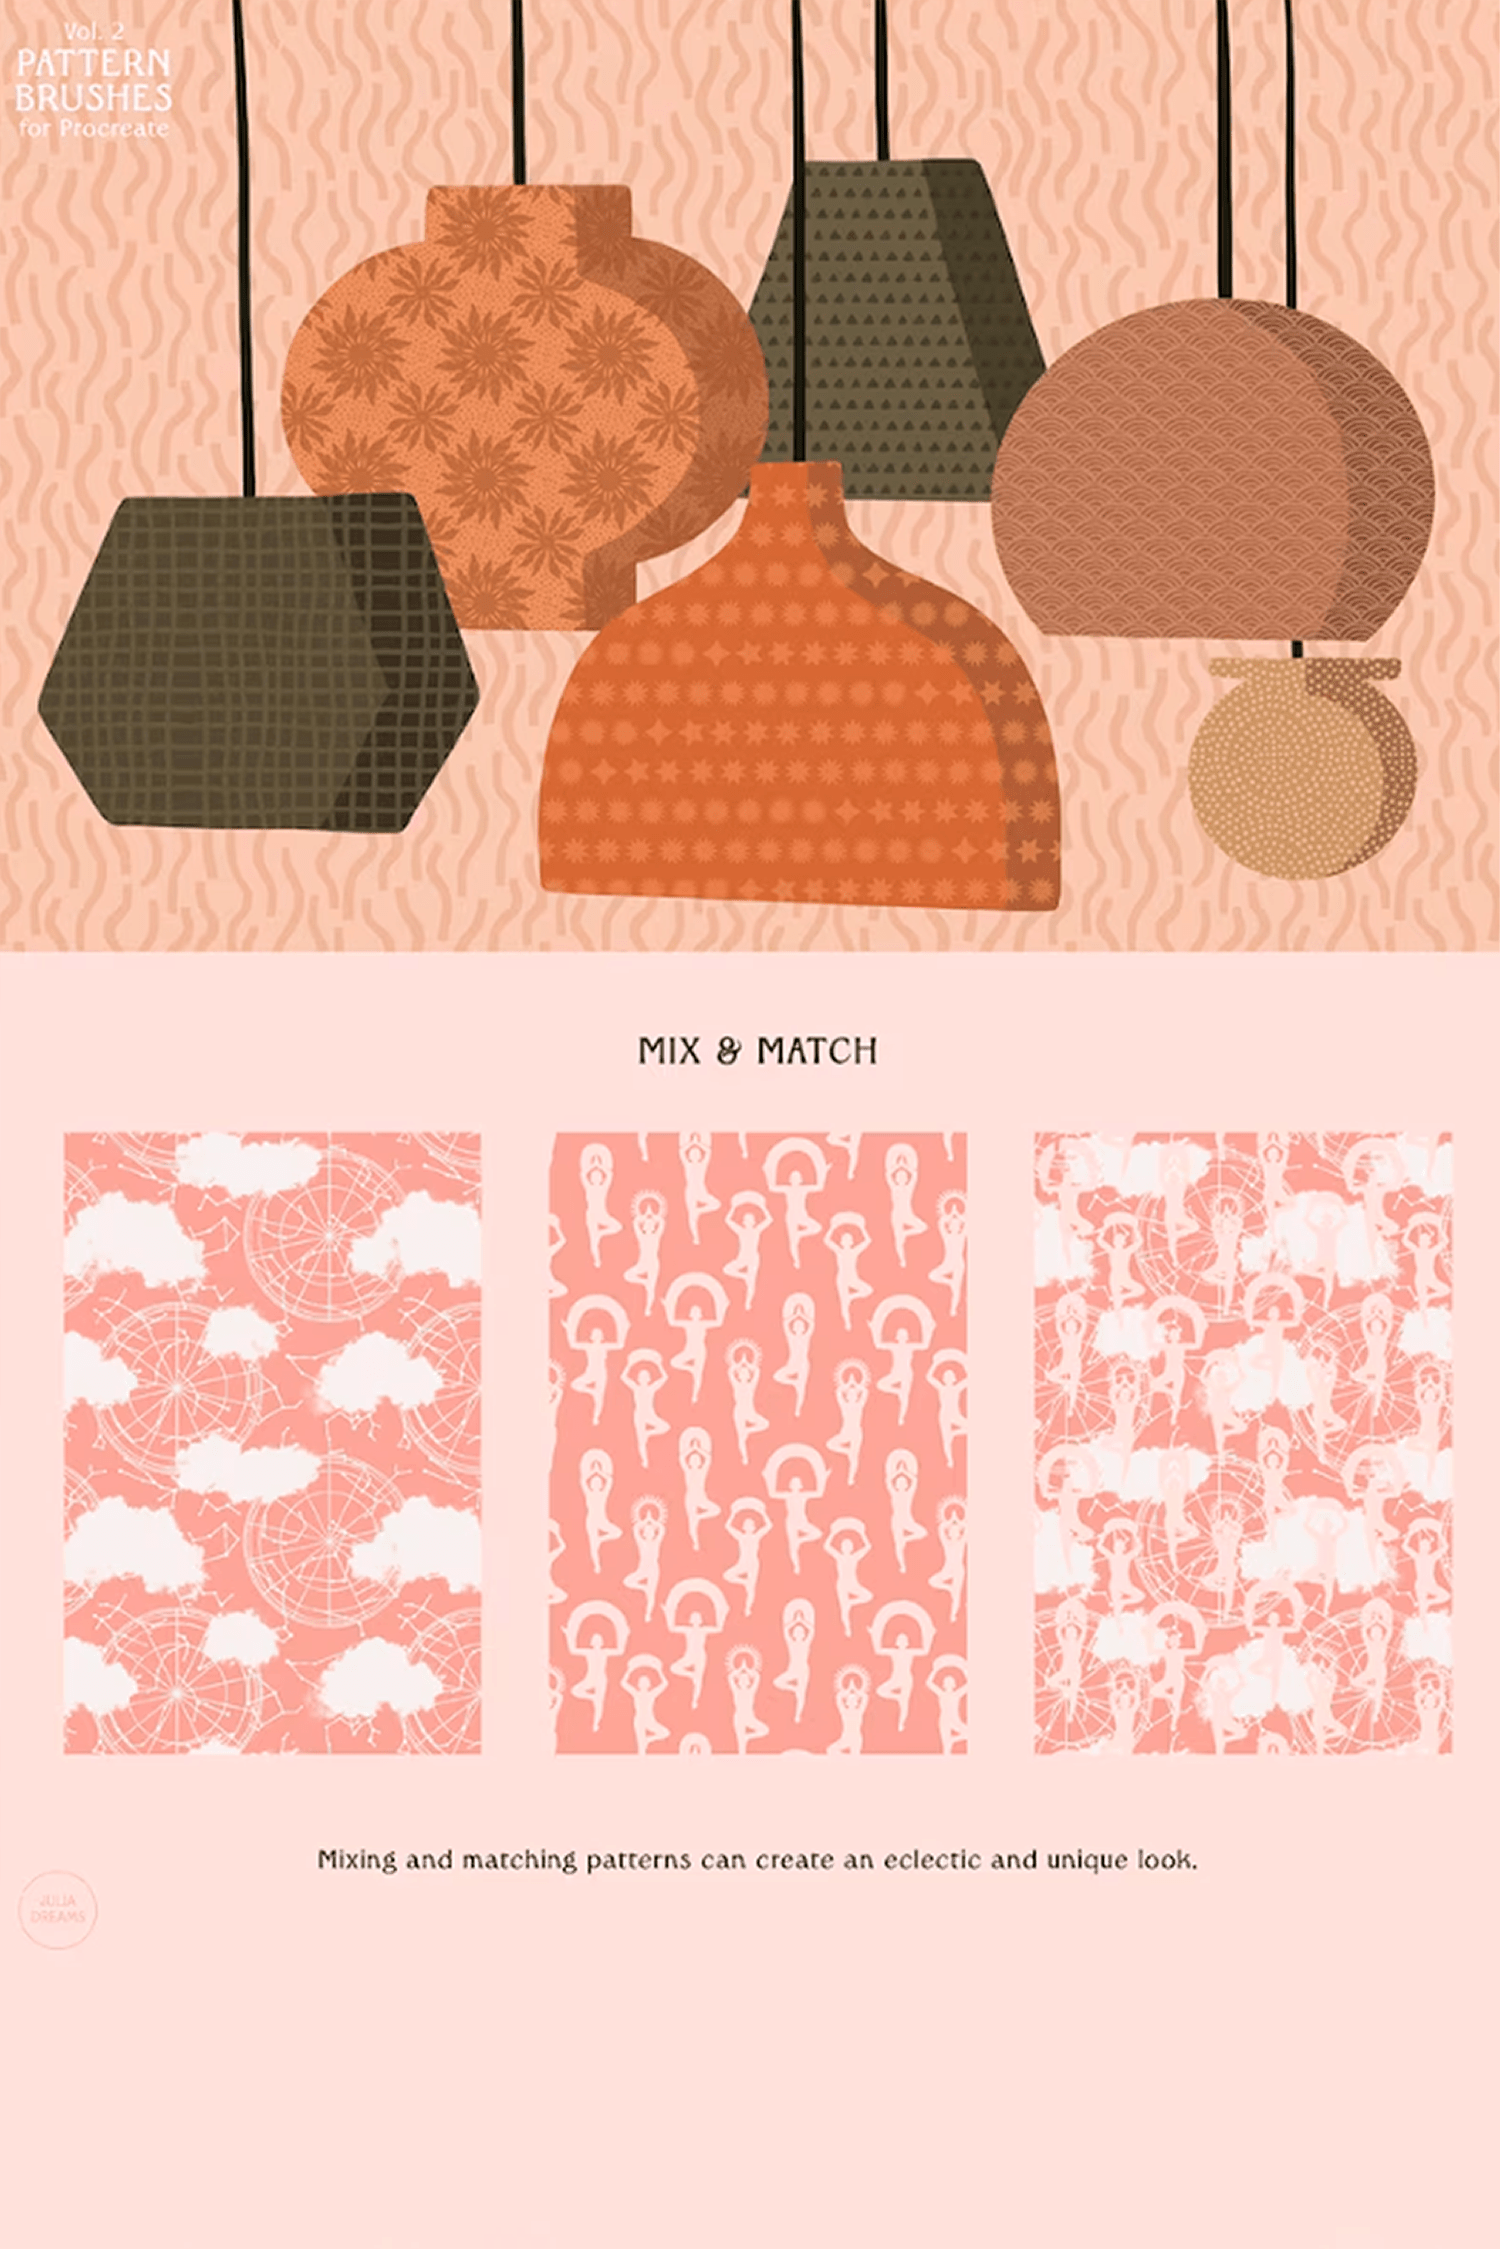 Pattern Brushes Vol 2 by Julia Dreams